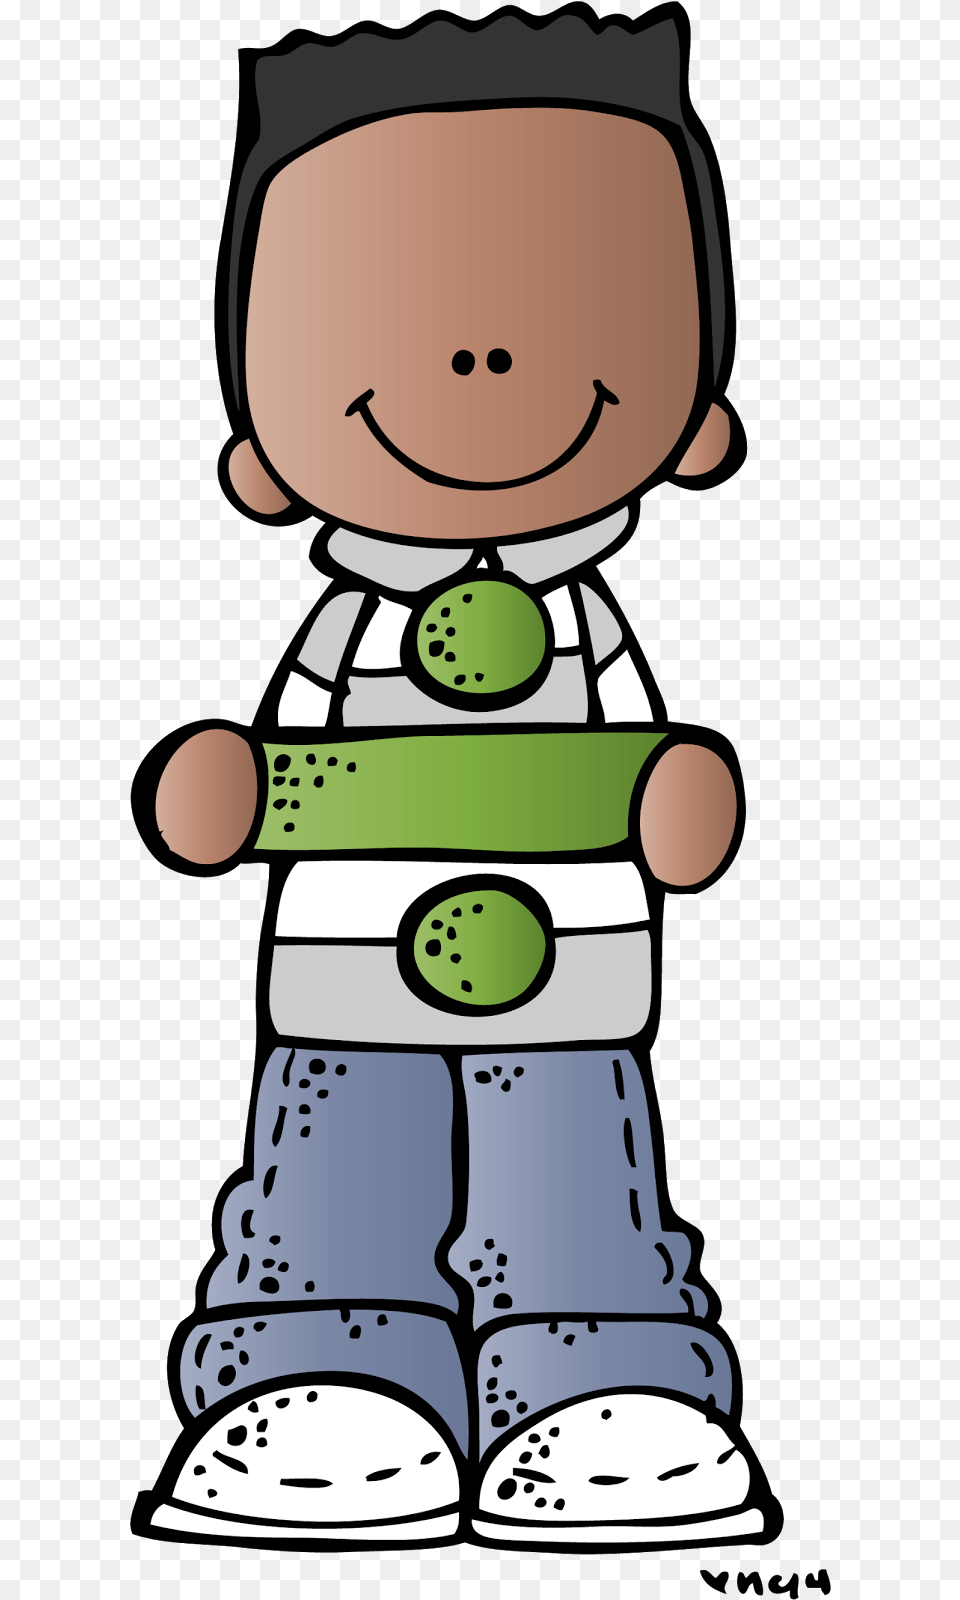 Melonheadz Boy Dividing Unit Fractions By Whole Numbers Activities, Cutlery, Nature, Outdoors, Snow Png Image